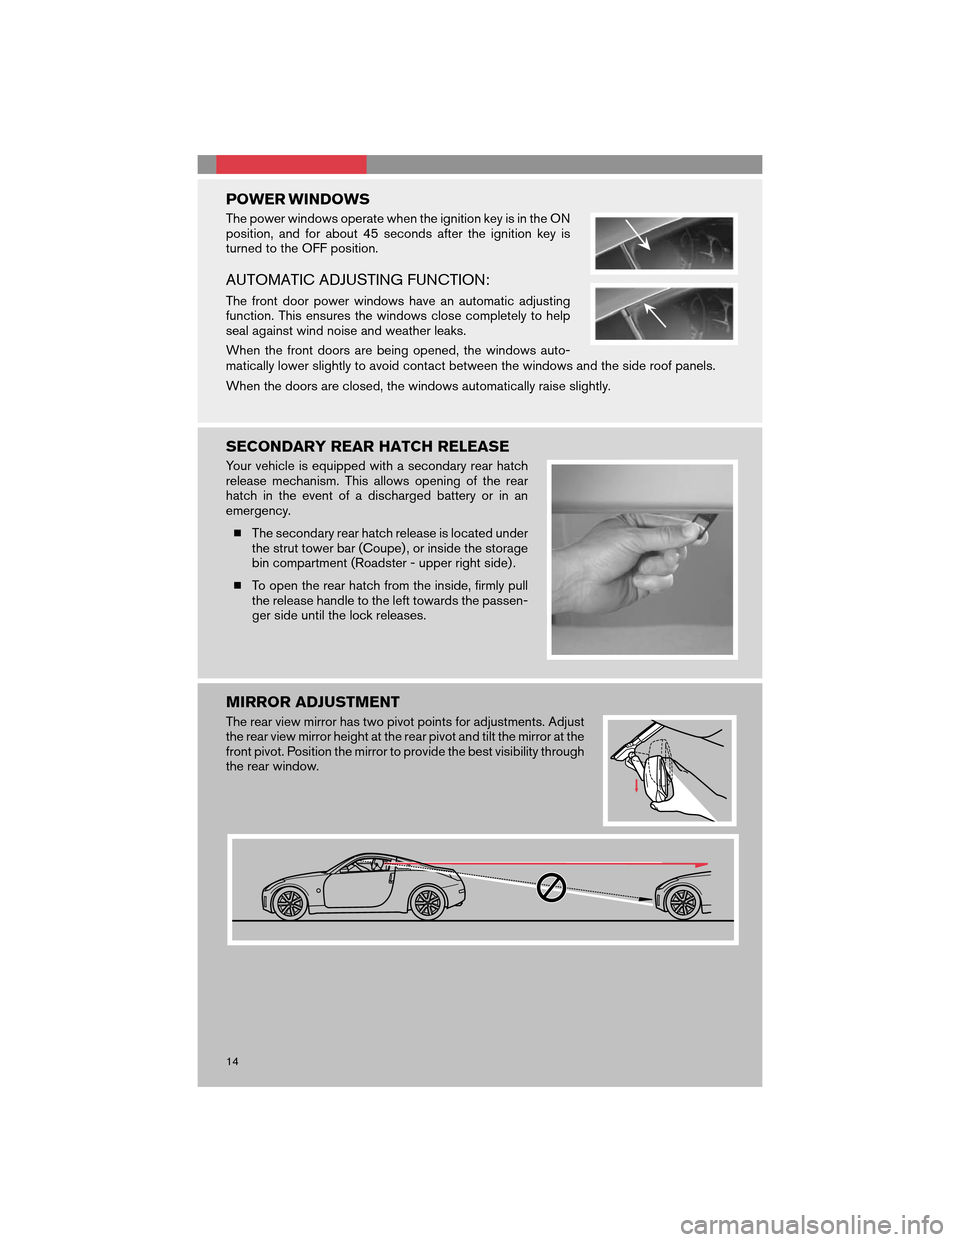 NISSAN 350Z 2008 Z33 Quick Reference Guide POWER WINDOWS
The power windows operate when the ignition key is in the ON
position, and for about 45 seconds after the ignition key is
turned to the OFF position.
AUTOMATIC ADJUSTING FUNCTION:
The fr